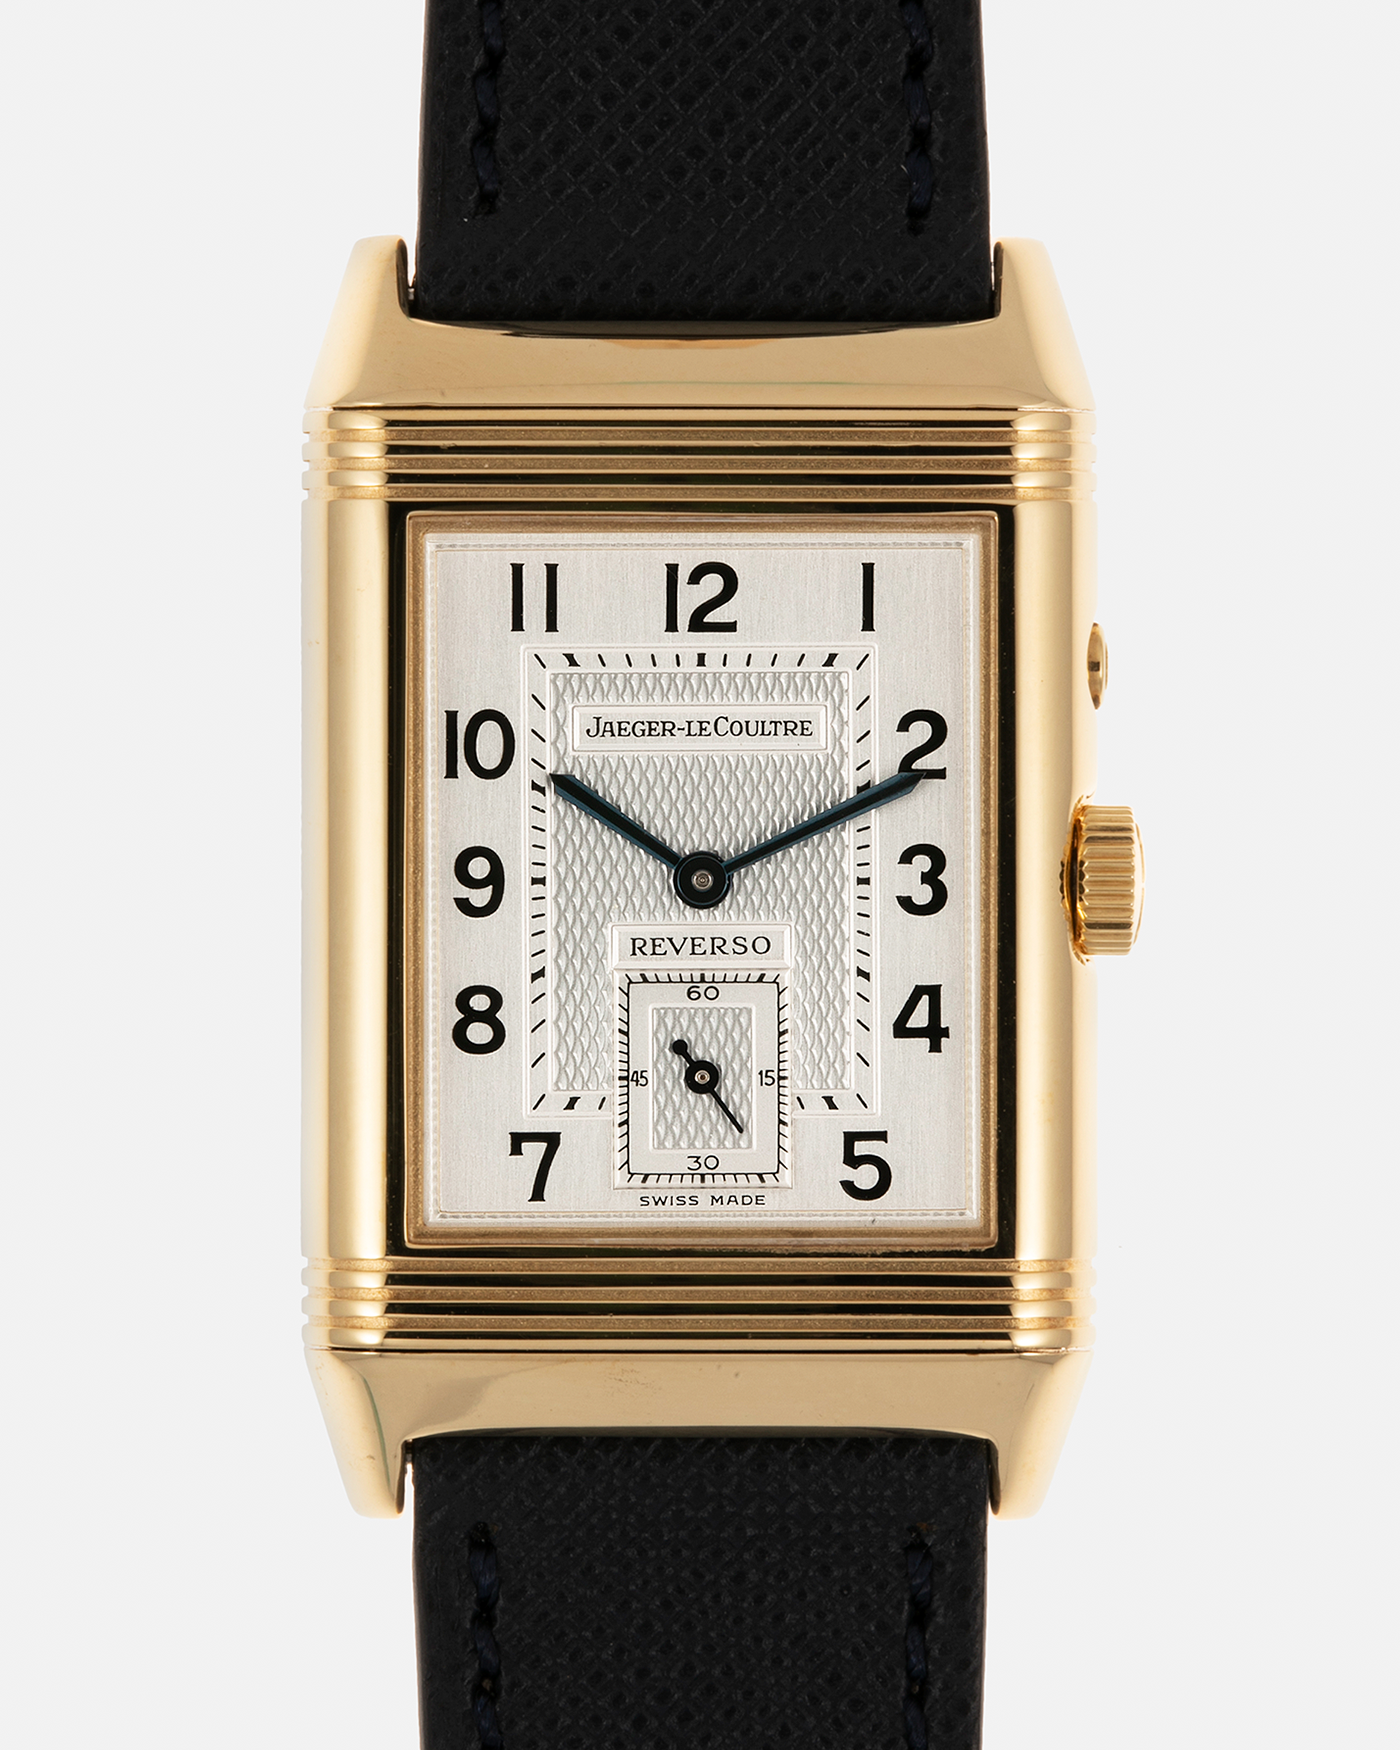 Brand: Jaeger LeCoultre Year: 2000s Model: Reverso Duoface Japan Edition Blue, Limited Edition of 39 Pieces Reference Number: 270.1.54 Case Material: 18-carat Yellow Gold Movement: Jaeger LeCoultre Cal. 854, Manual-Wind Case Diameter: 42mm x 26mm Lug Width: 19mm Strap: Molequin Navy Blue Textured Calf Leather Strap with Signed 1-carat Yellow Gold Deployant Clasp, with additional Jaeger LeCoultre Black Alligator Leather Strap (Used)